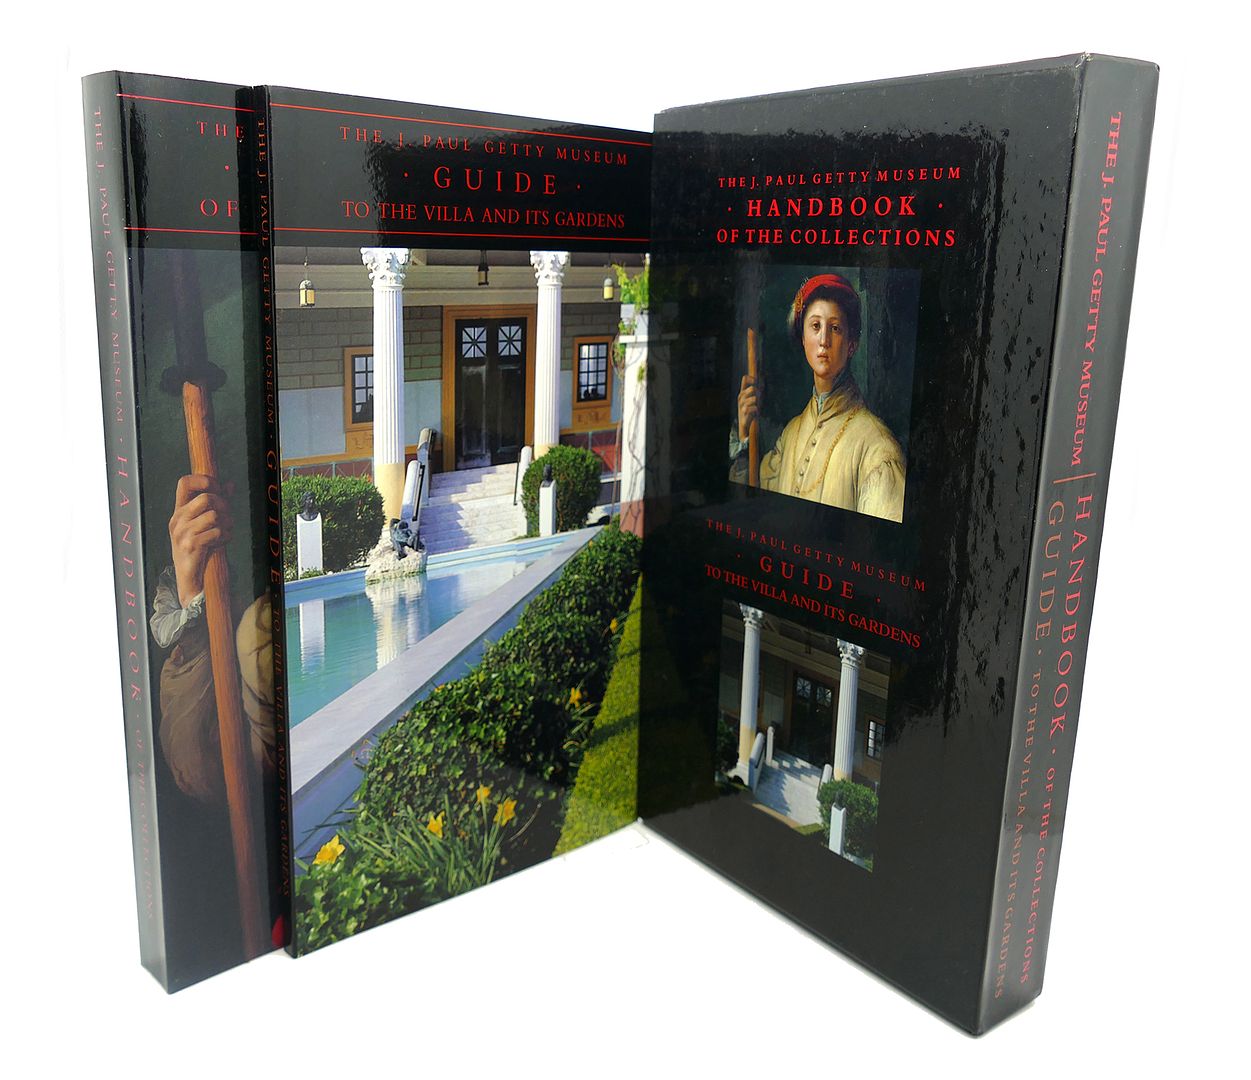  - The J. Paul Getty Museum Handbook of the Collections and Guide to the Villa and Its Gardens 2 Volumes